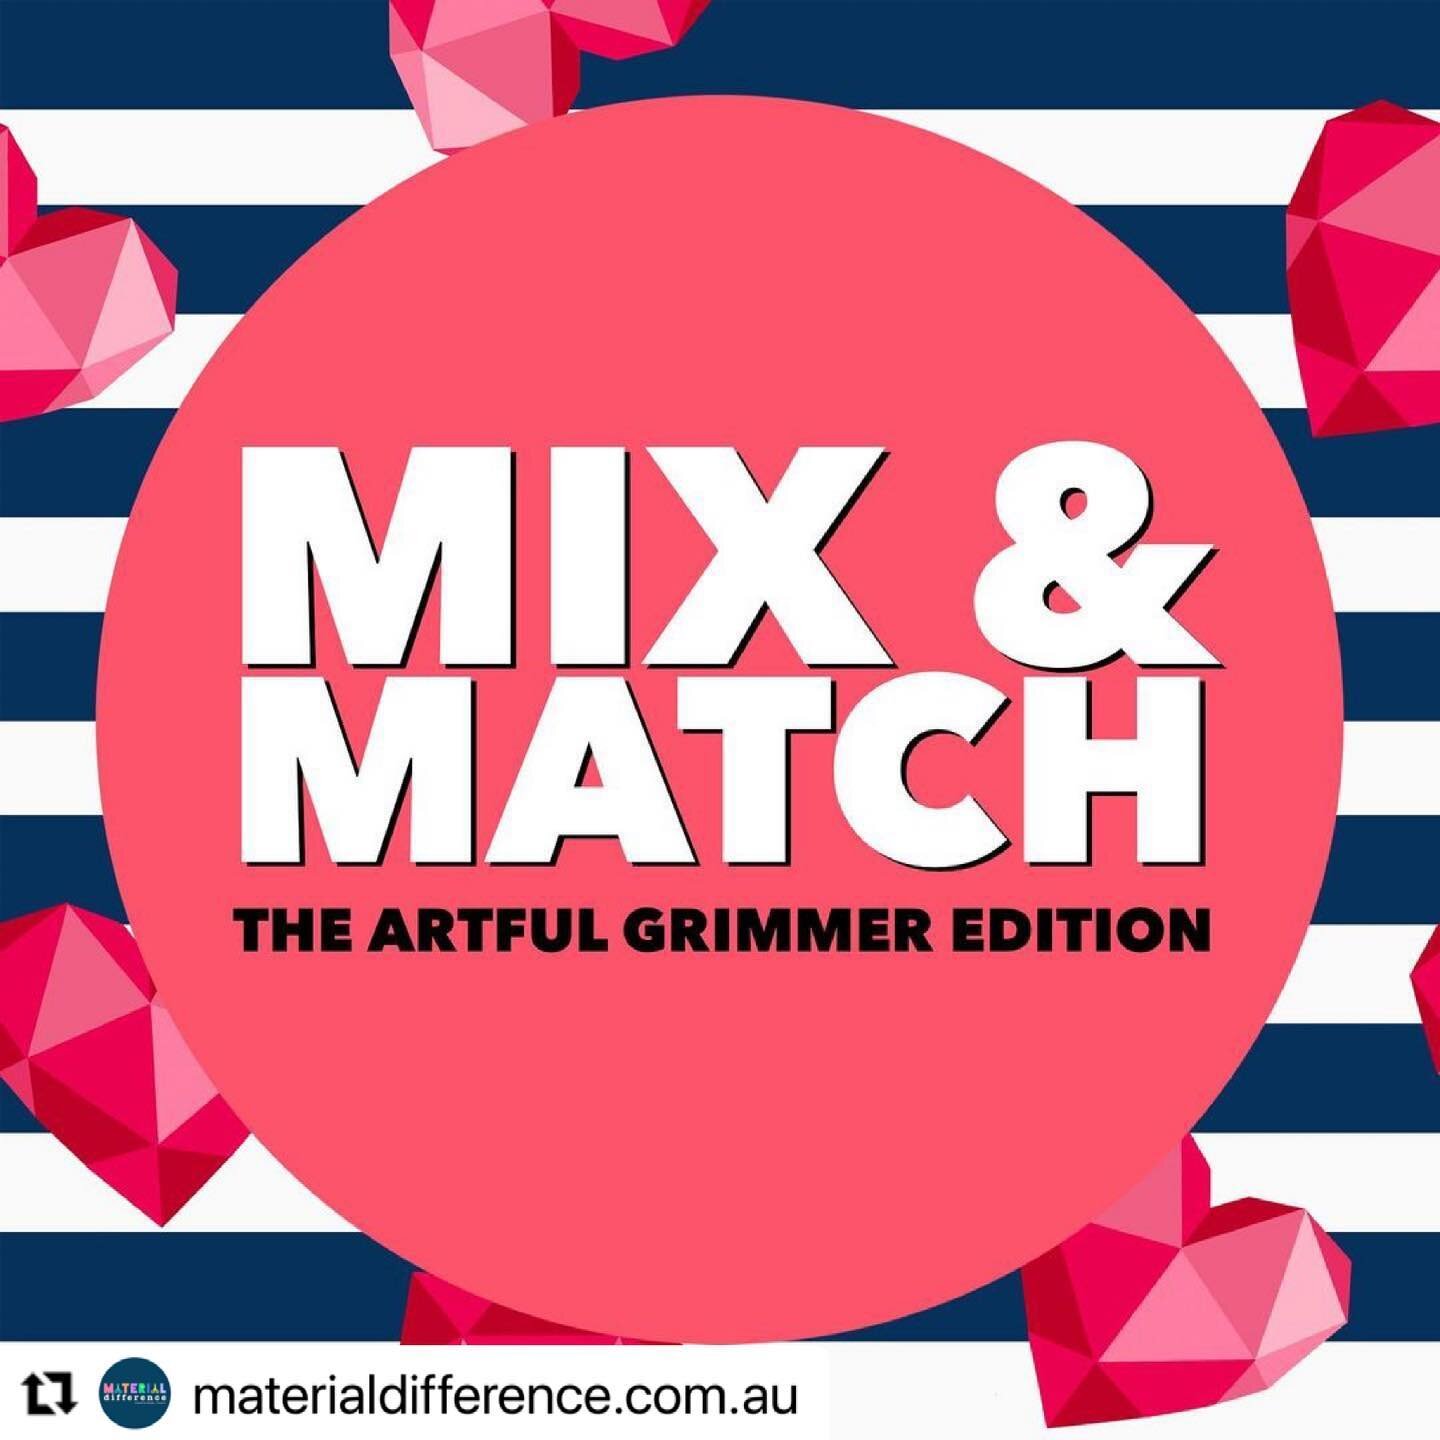 If you have your eye on one of my limited edition fabric designs over at @materialdifference.com.au, check out all the coordinating fabric options available too. So fun!
&bull;
#Repost @materialdifference.com.au with @make_repost
・・・
Tonight&rsquo;s 